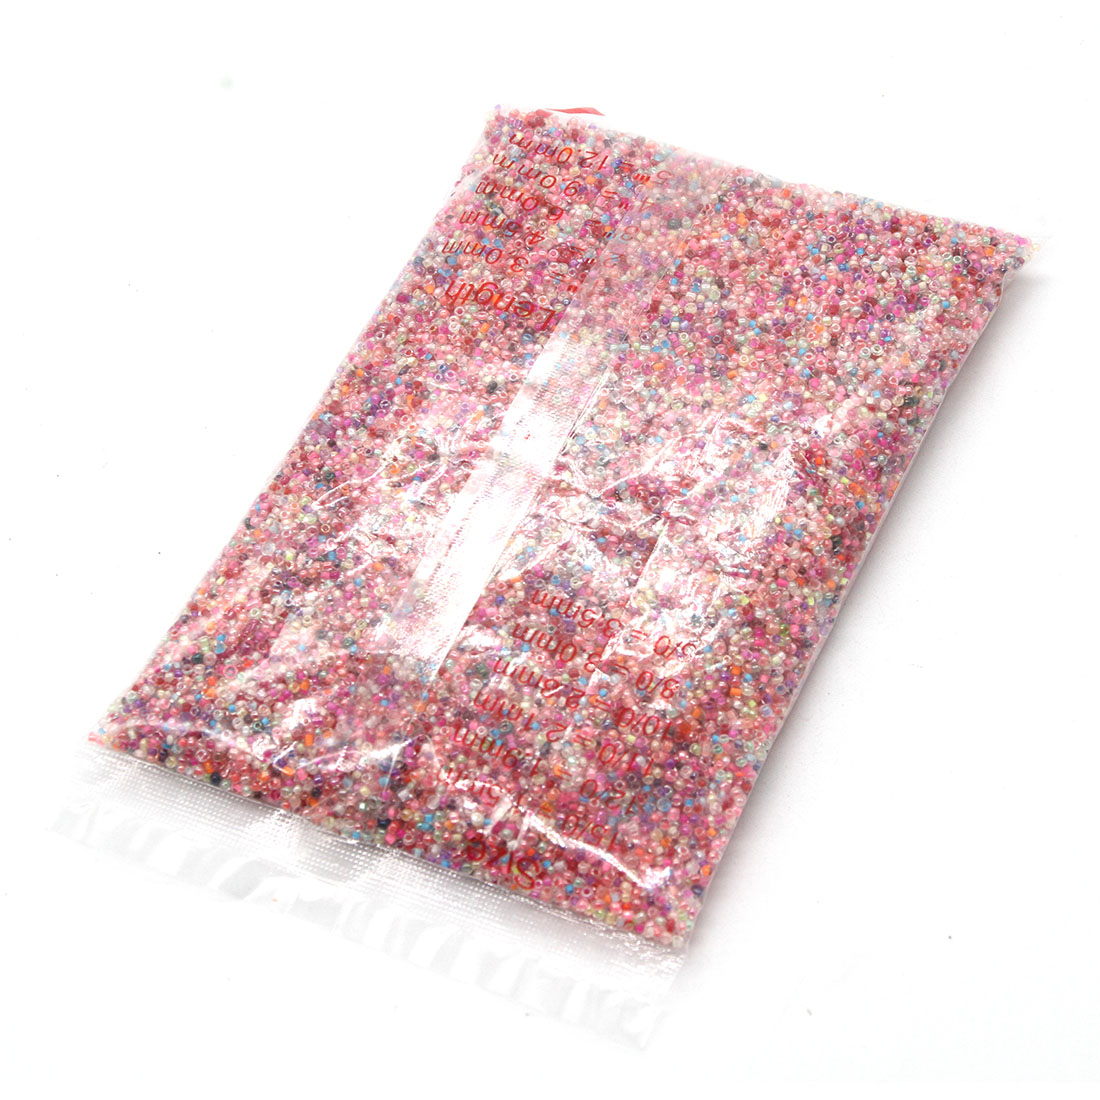 Mixed color 4mm 4500 packs